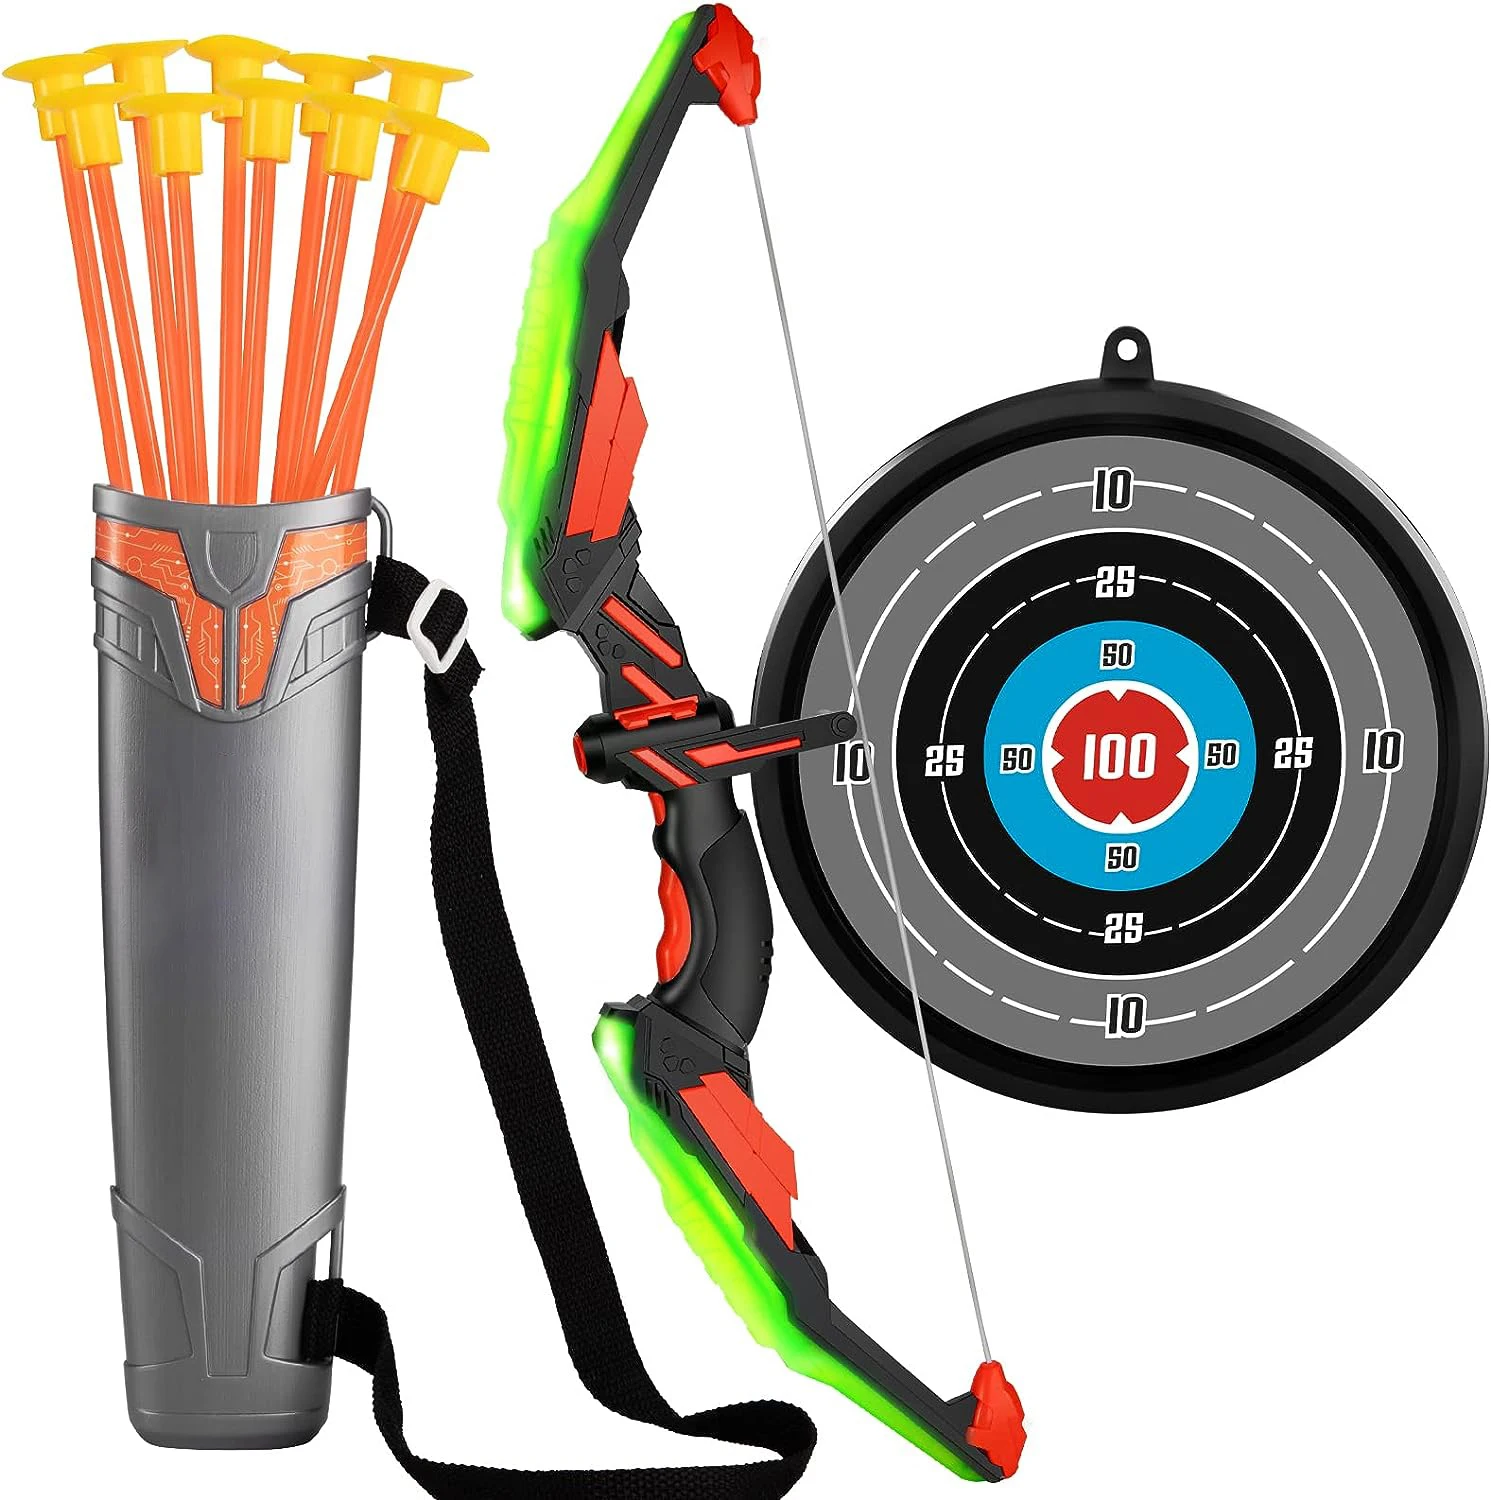 

Kids Bow and Arrow Set - LED Light Up Archery Toy Set with 10 Suction Cup Arrows, Target & Quiver, Indoor and Outdoor Toys for